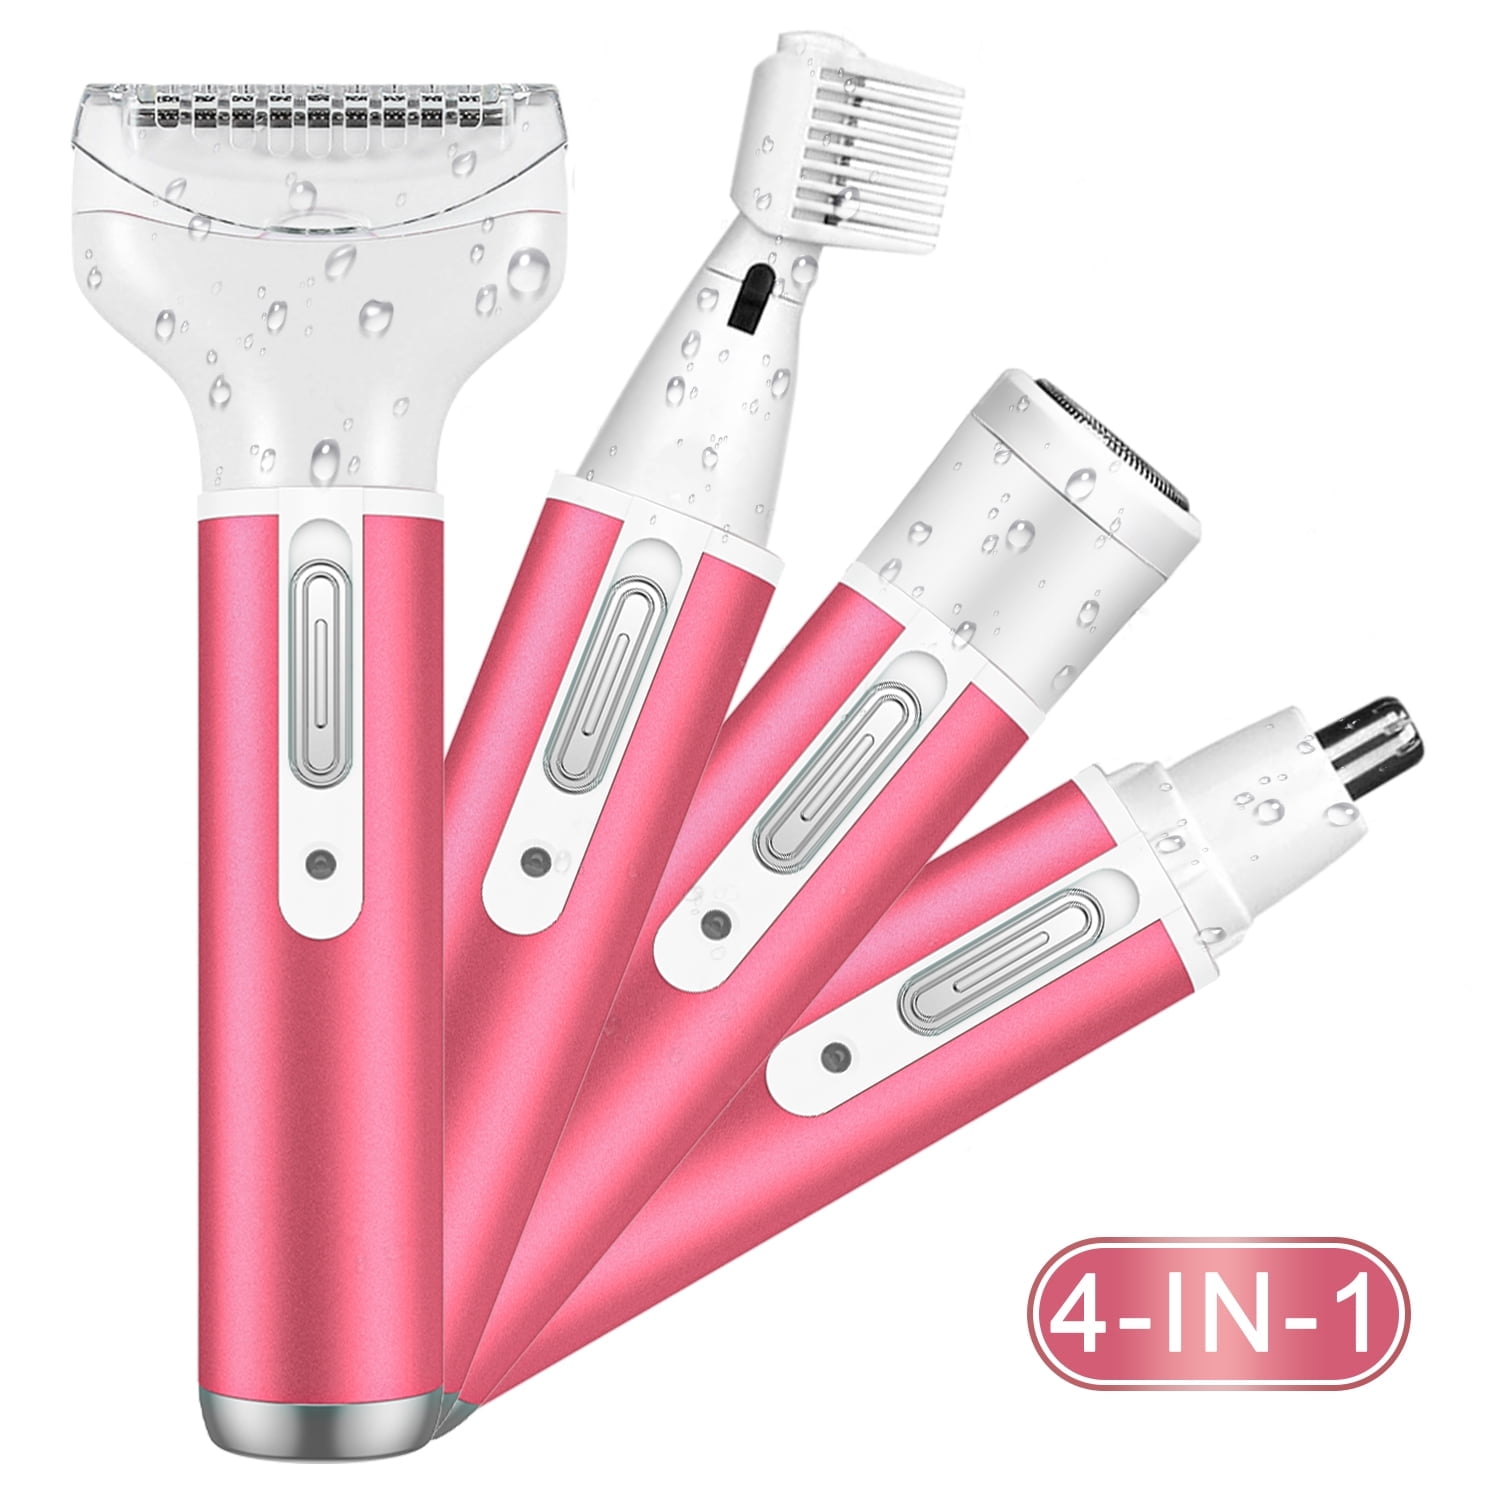 4-in-1 Hair Removal Women Electric Shaver Ladies Razor Hair Remover  Epilator USB Rechargeable for Face Body Legs Hair Trimmer Grooming Kit -  Walmart.com